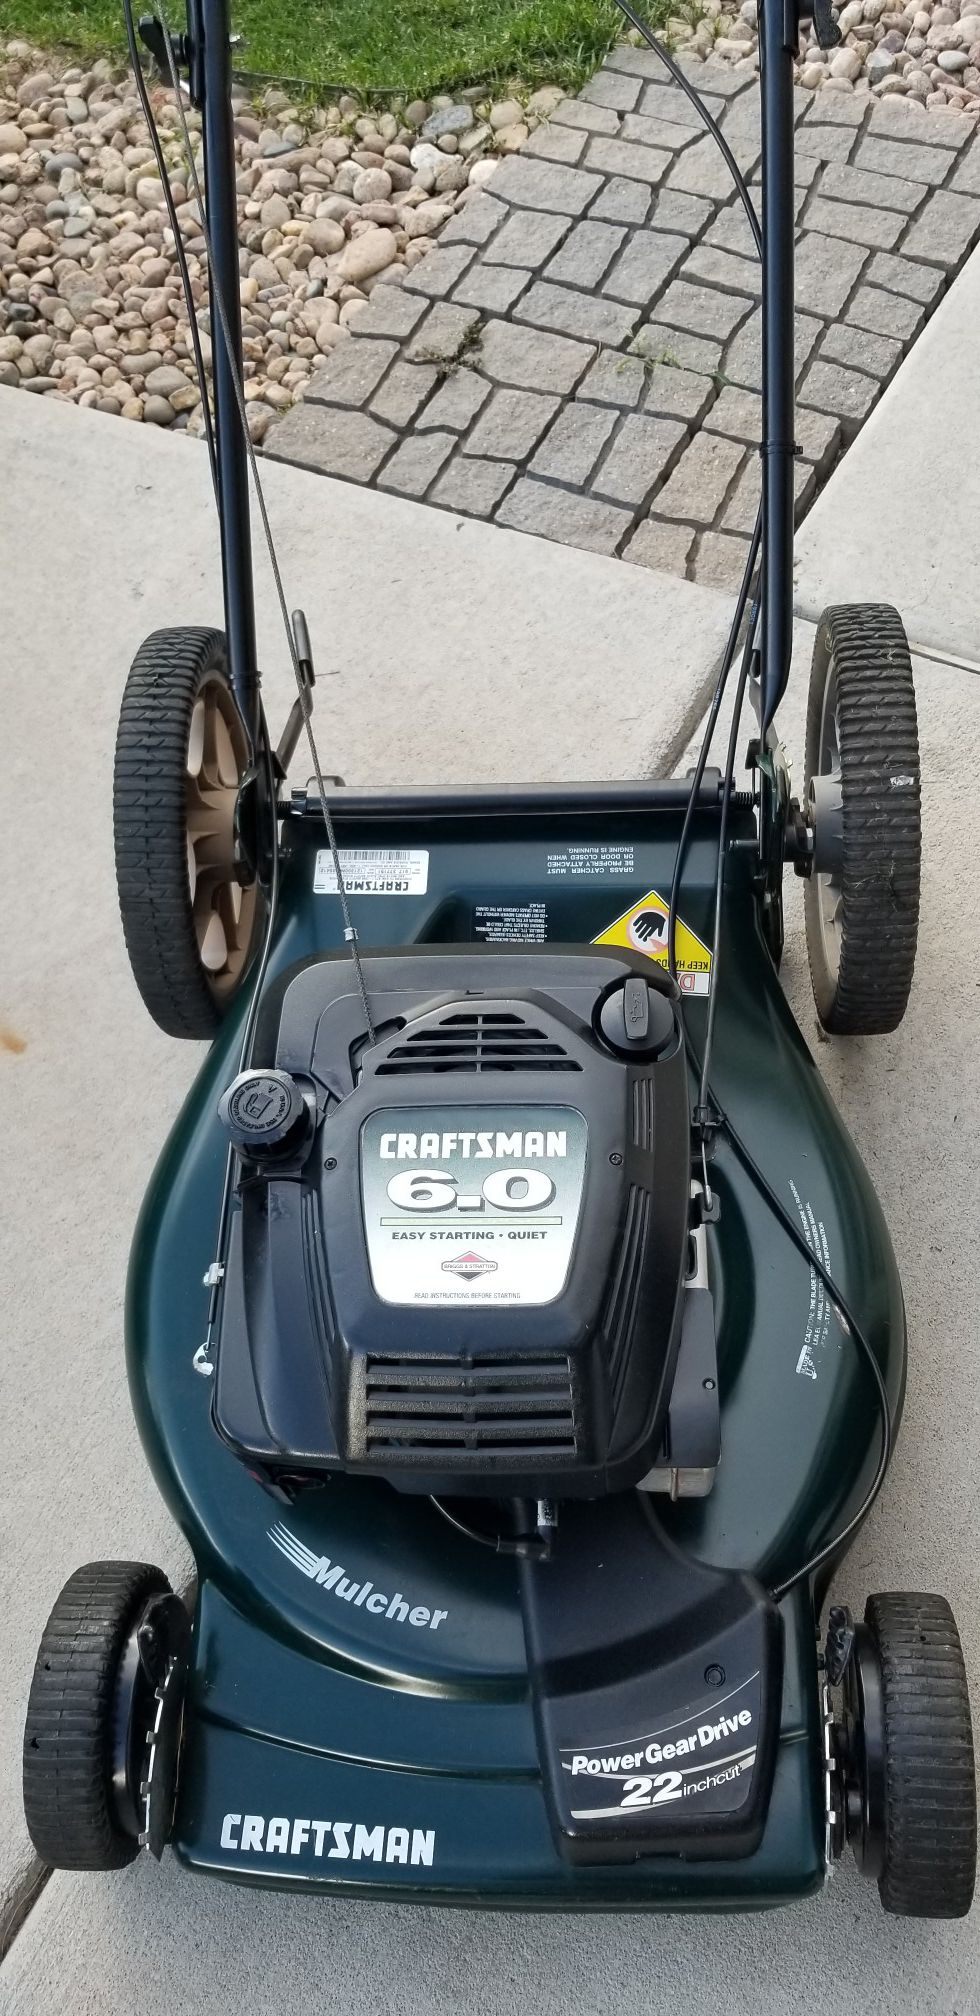 Craftsman self propelled lawnmower - excellent condition